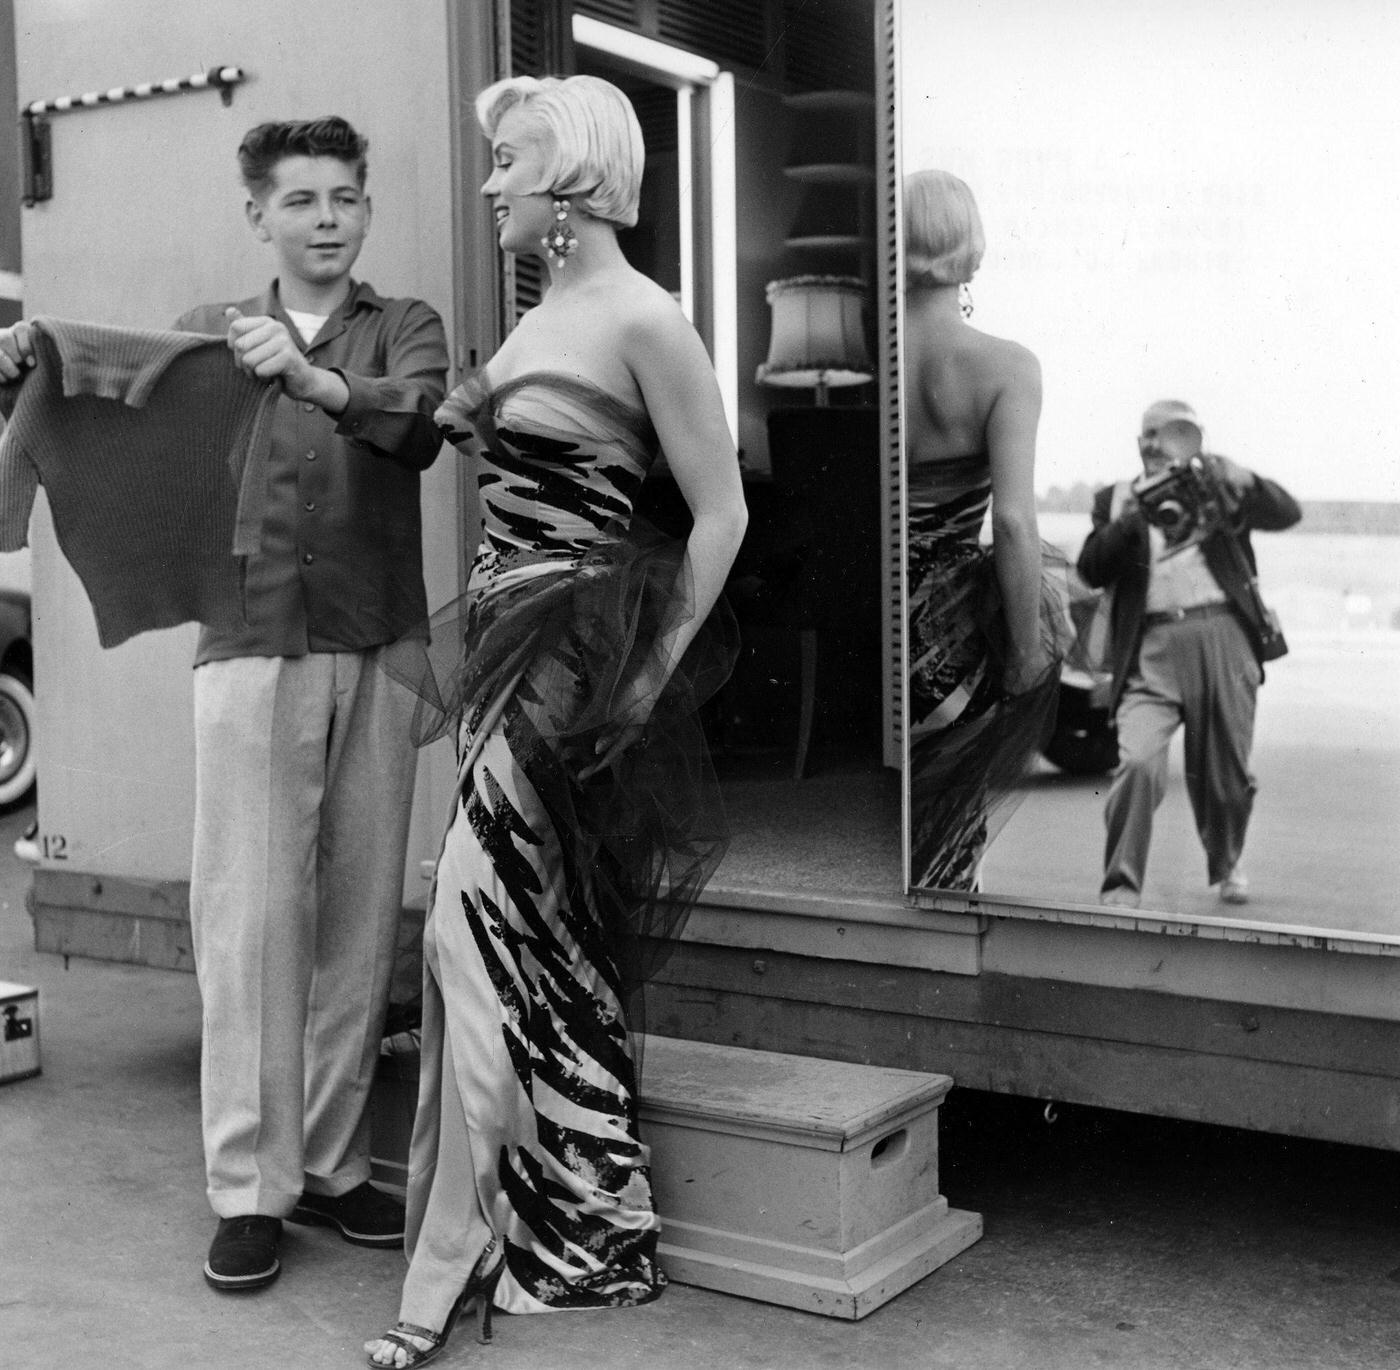 Marilyn Monroe wearing a tiger-striped dress talks to a boy on set, with the photographer Frank Powolny